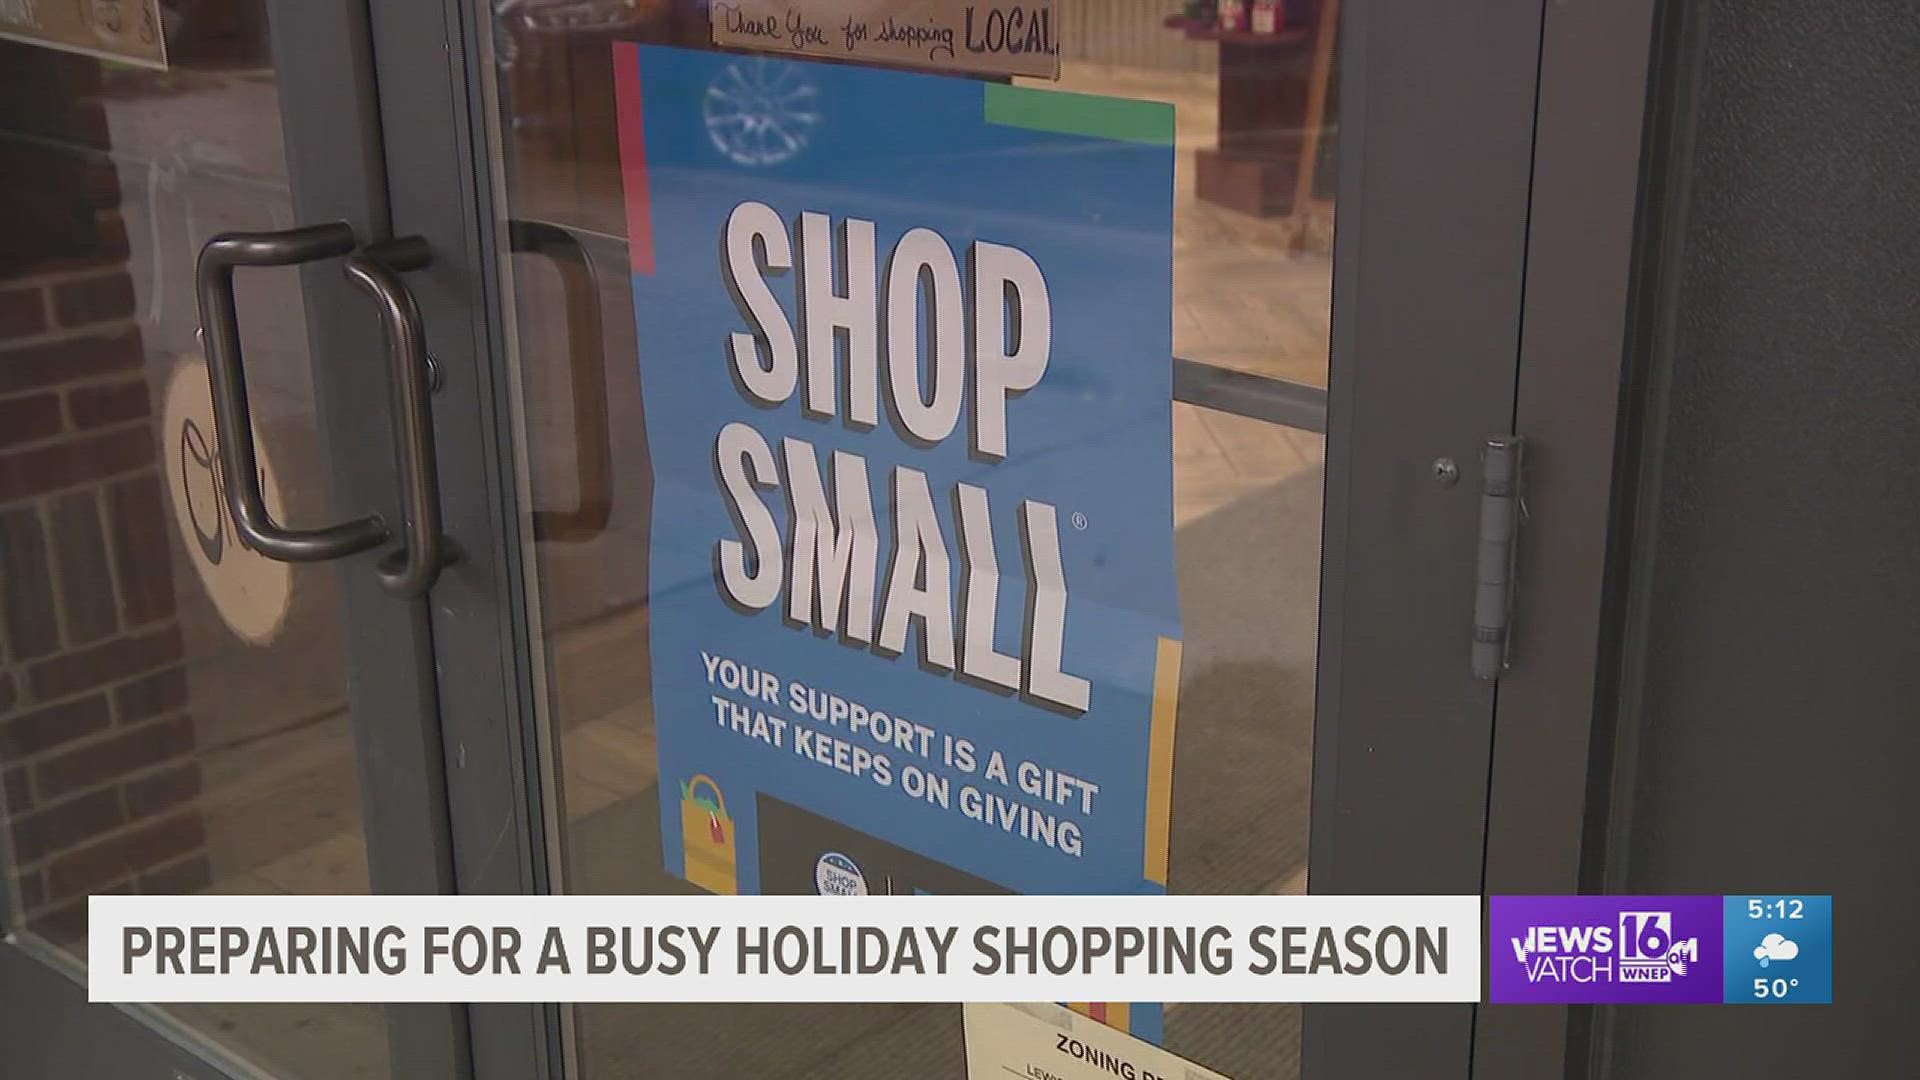 Many businesses hope you will "shop small" this holiday season, including stores in downtown Lewisburg.